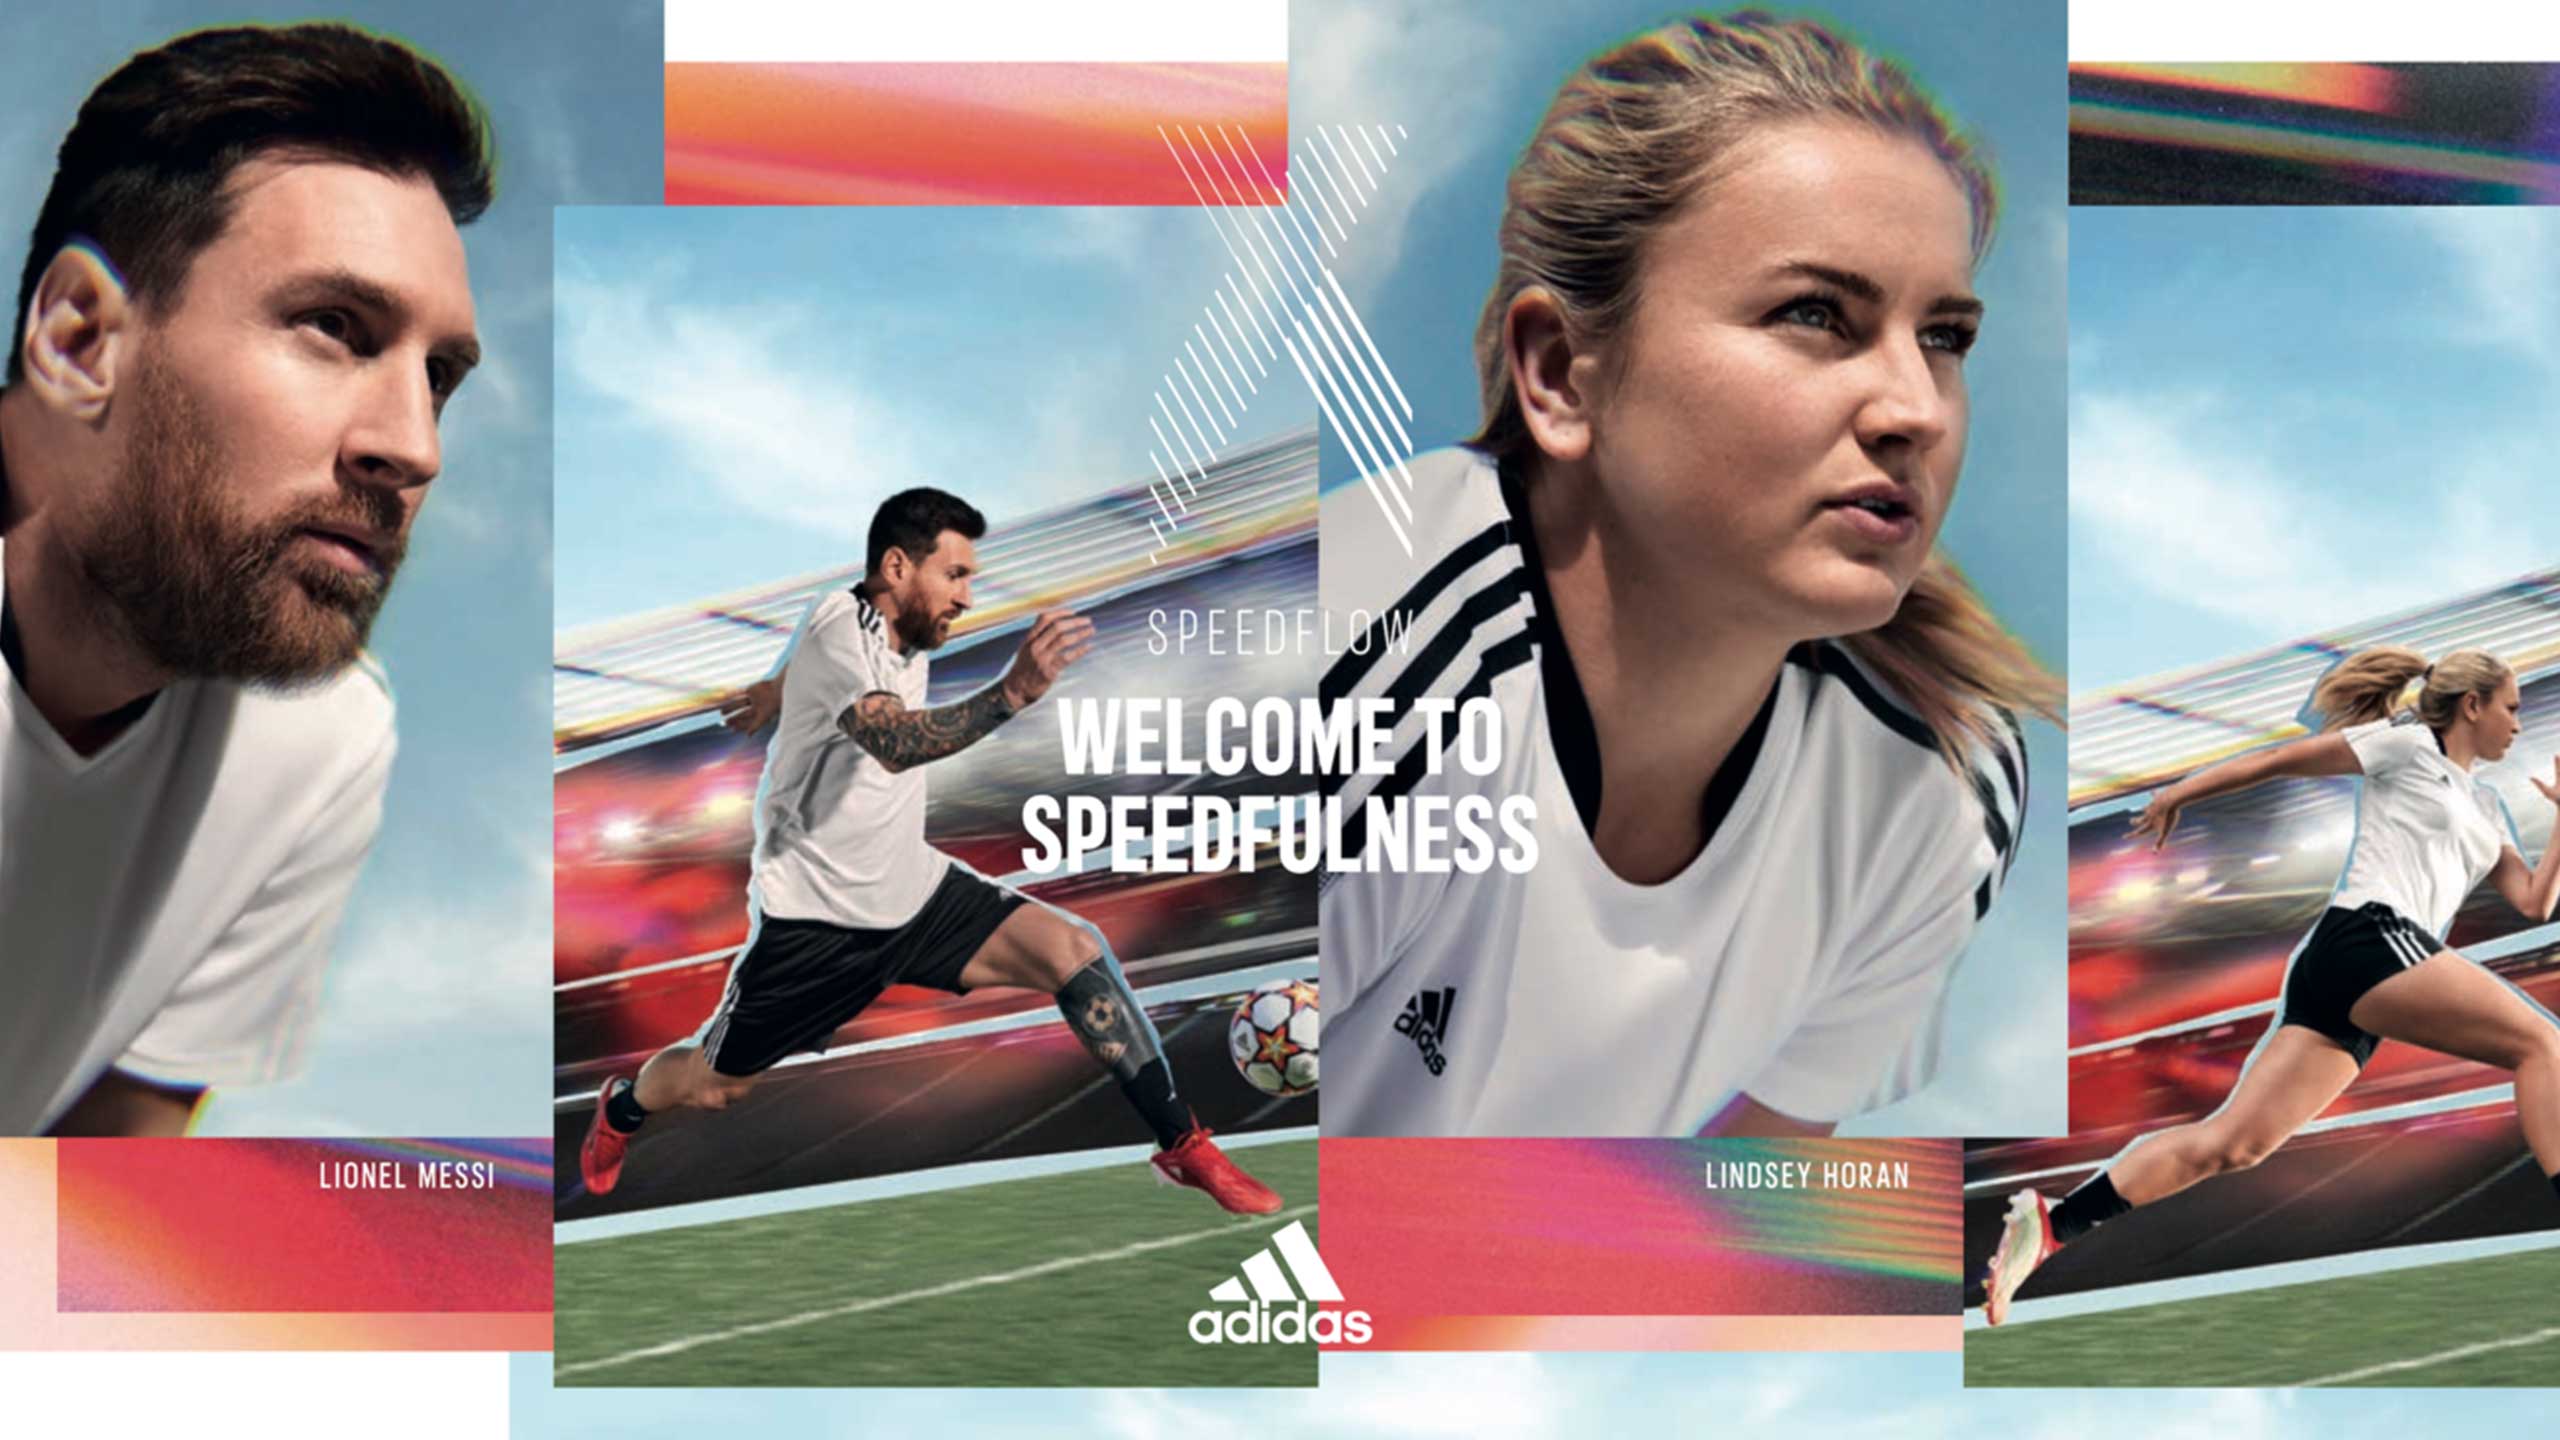 Adidas Fastest Follower Poster featuring the boot and various football players